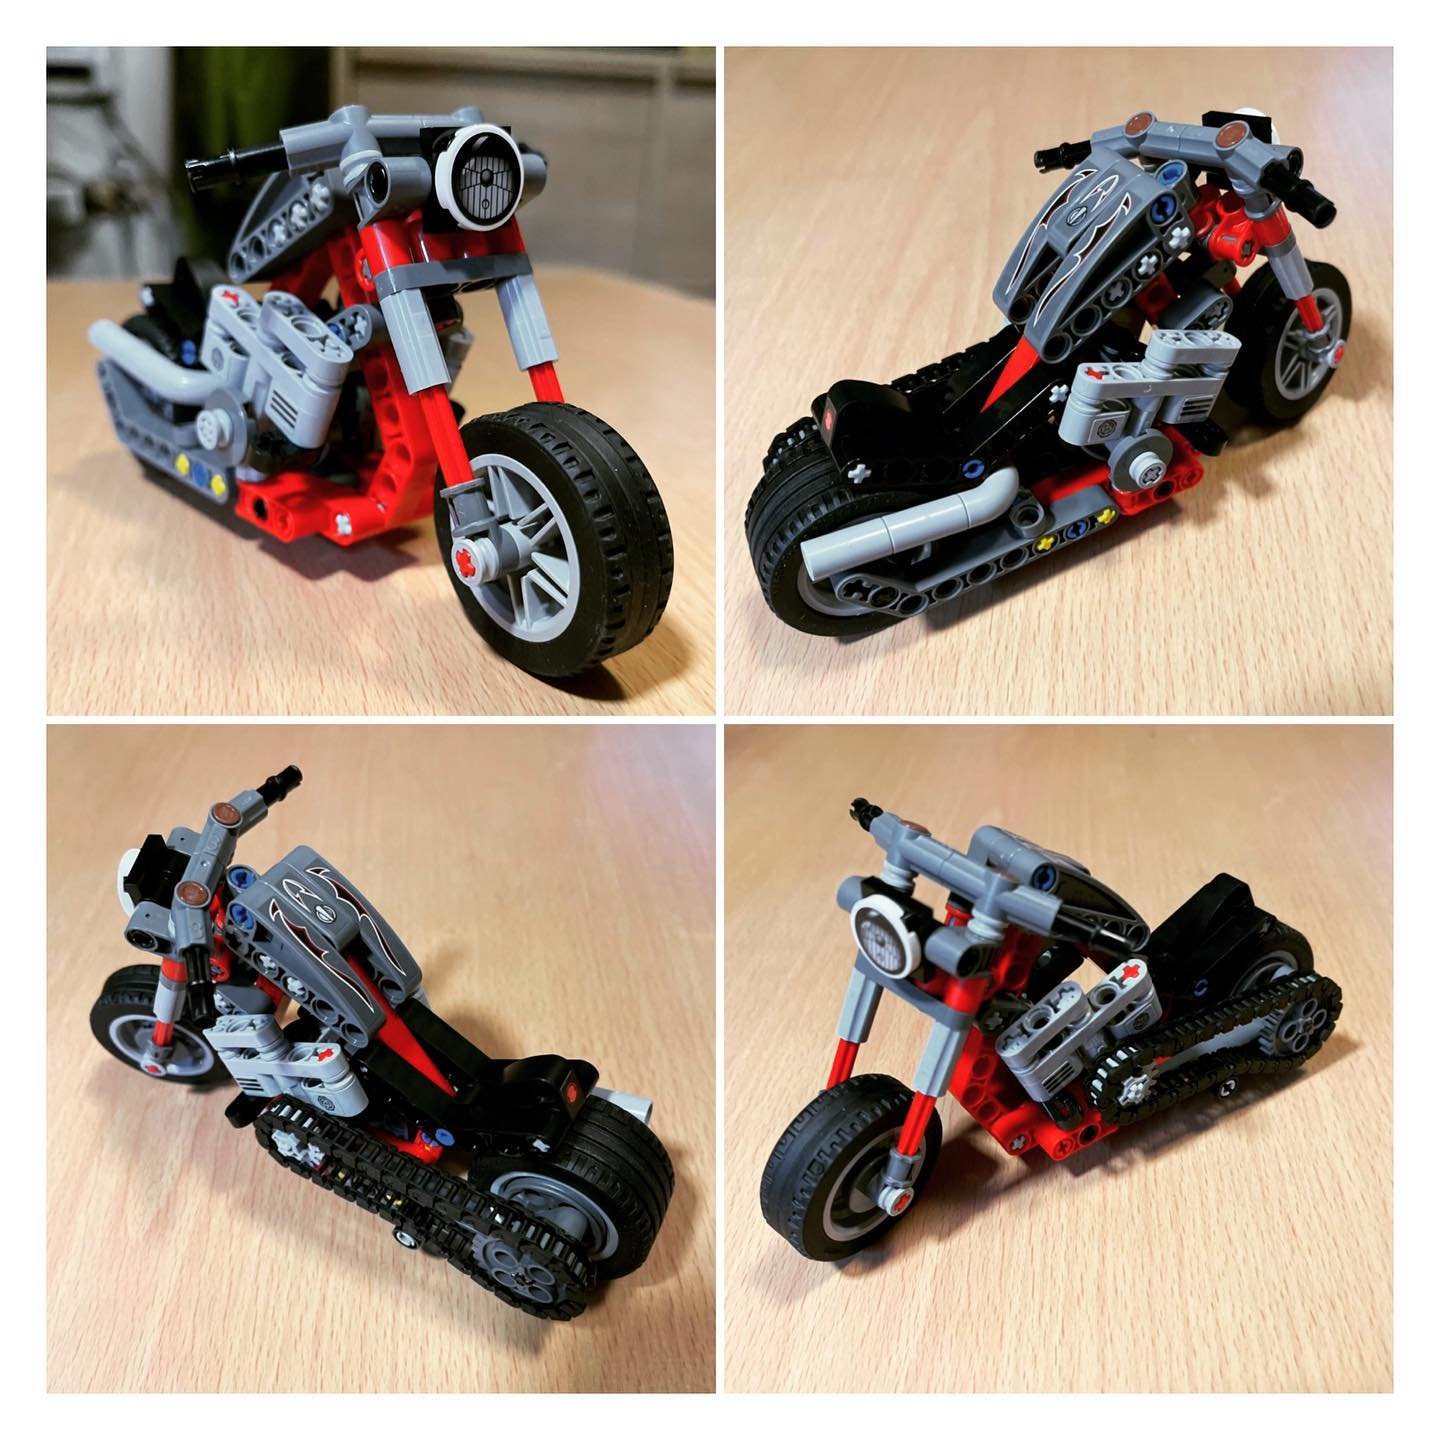 After 3 months. Had some time to build. #Lego #42132 #Motorcycle